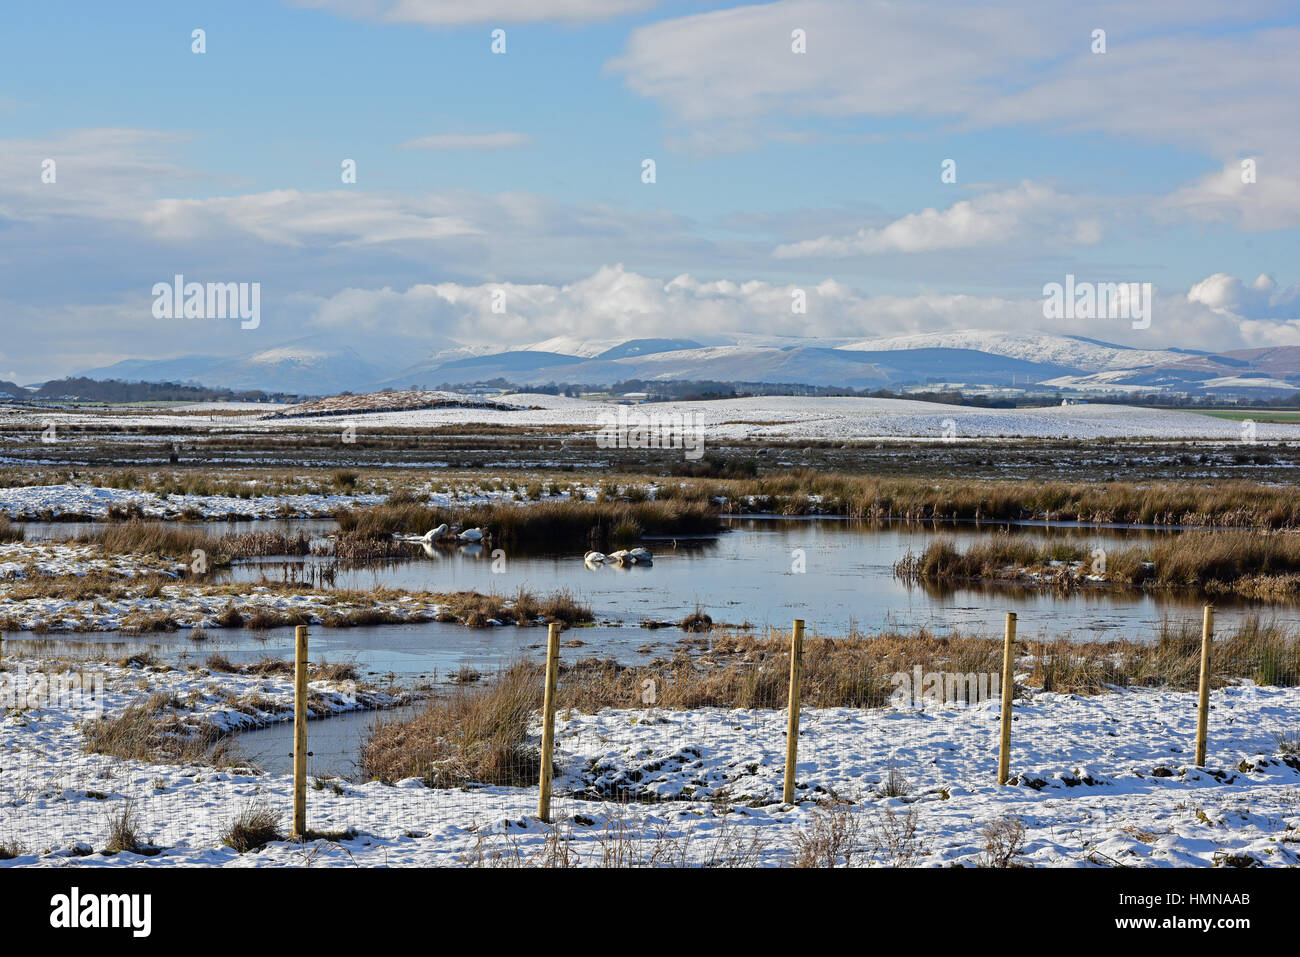 Kinross, Scotland, UK. 10th Feb, 2017. A snowy Loch Leven National Nature Reserve photographed from the RSPB's Loch Leven reserve, with the Ochil Hills in the background, Credit: Ken Jack/Alamy Live News Stock Photo